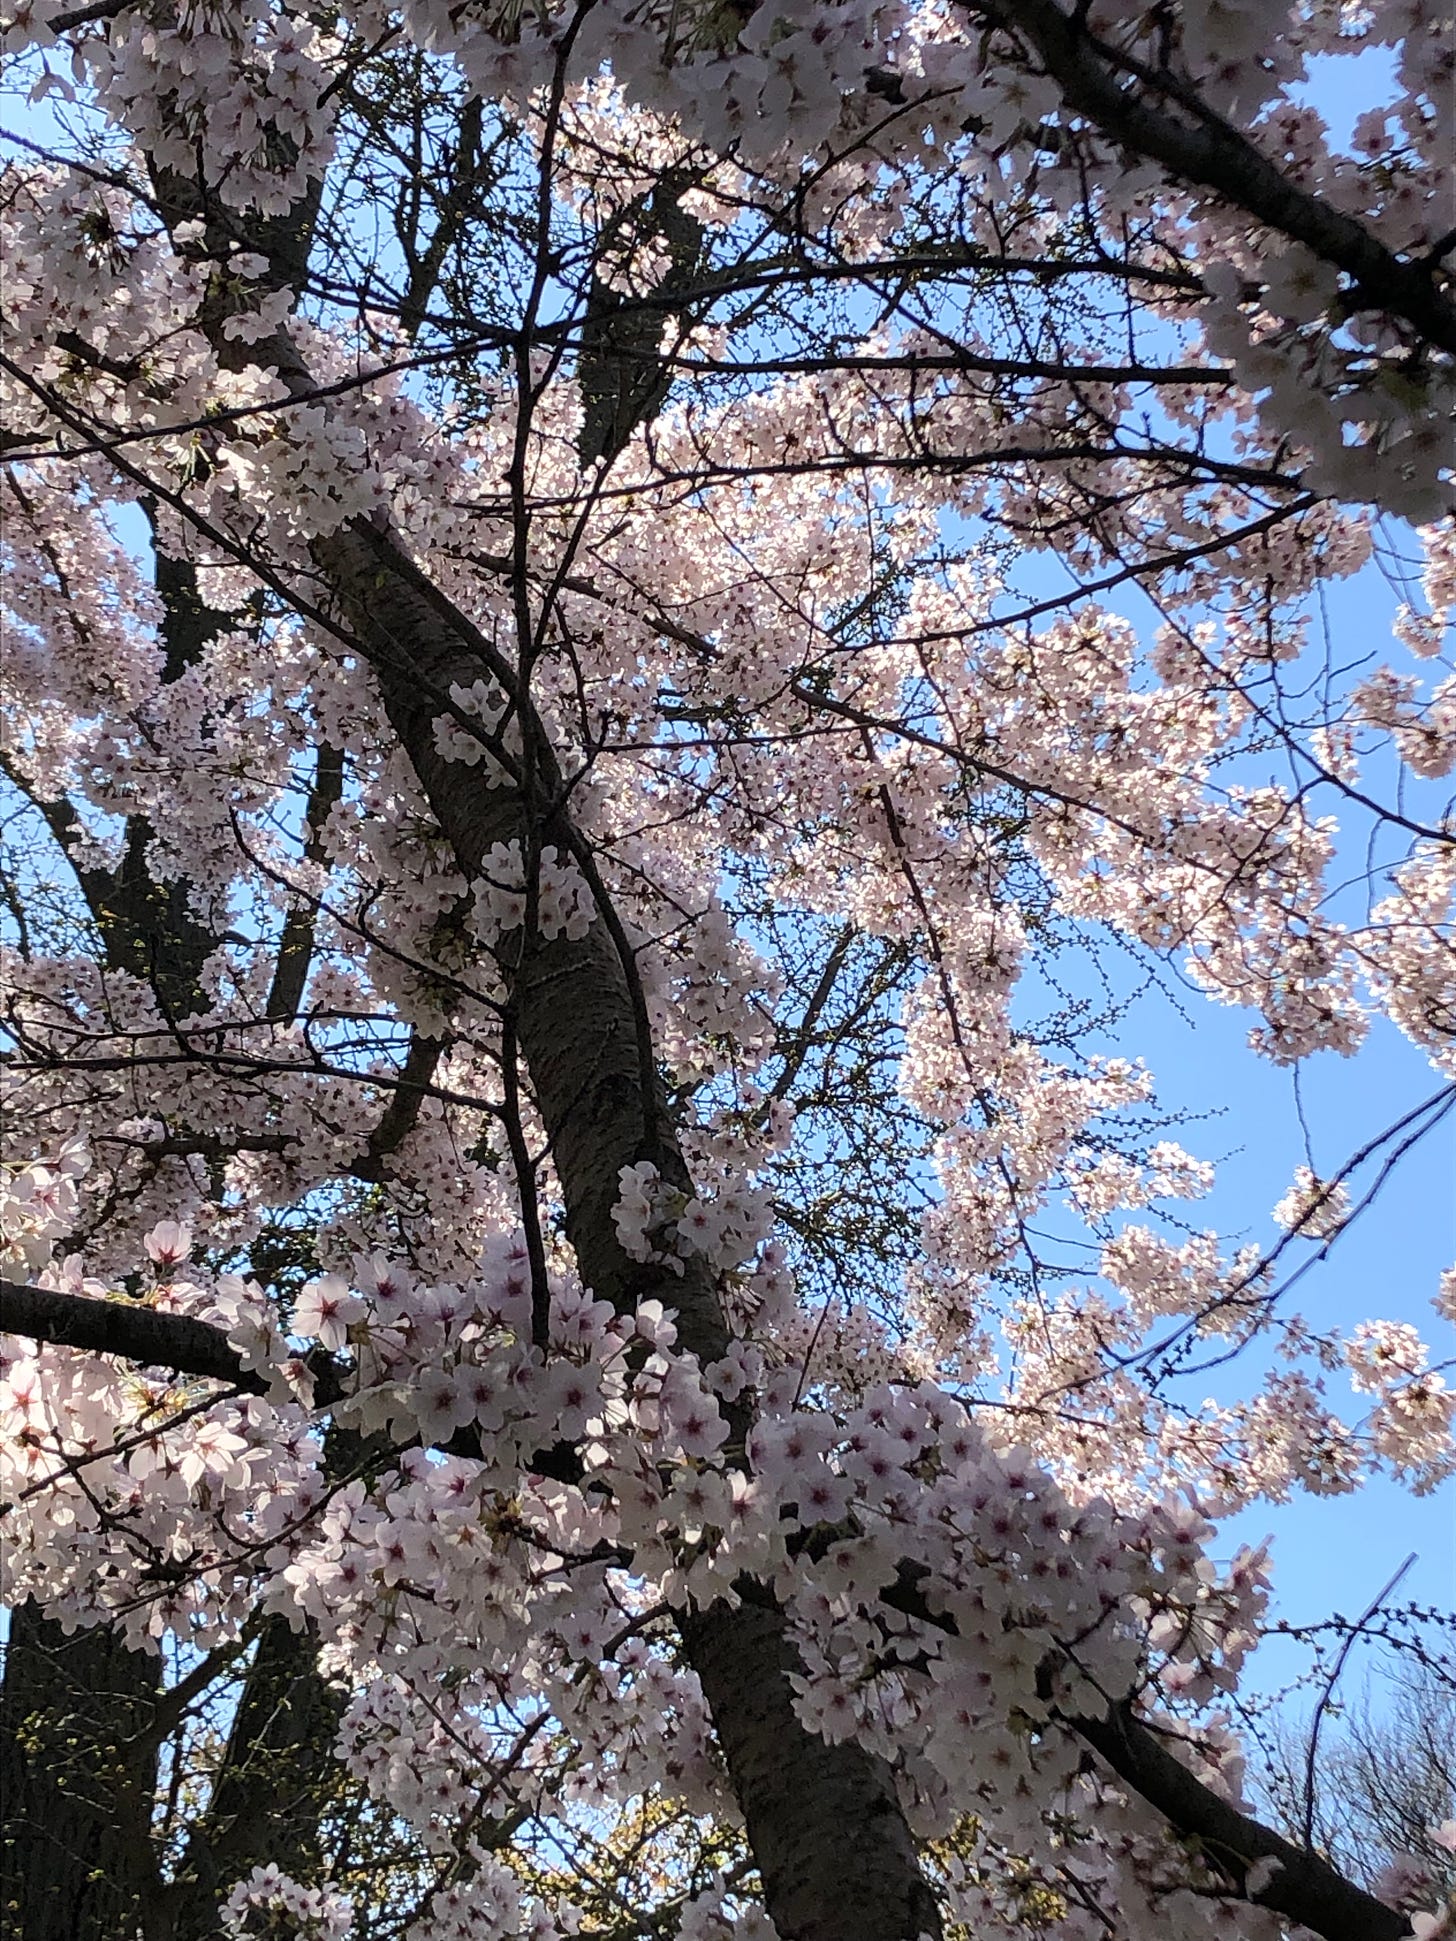 White cherry blossoms in bloom against a perfectly blue sky